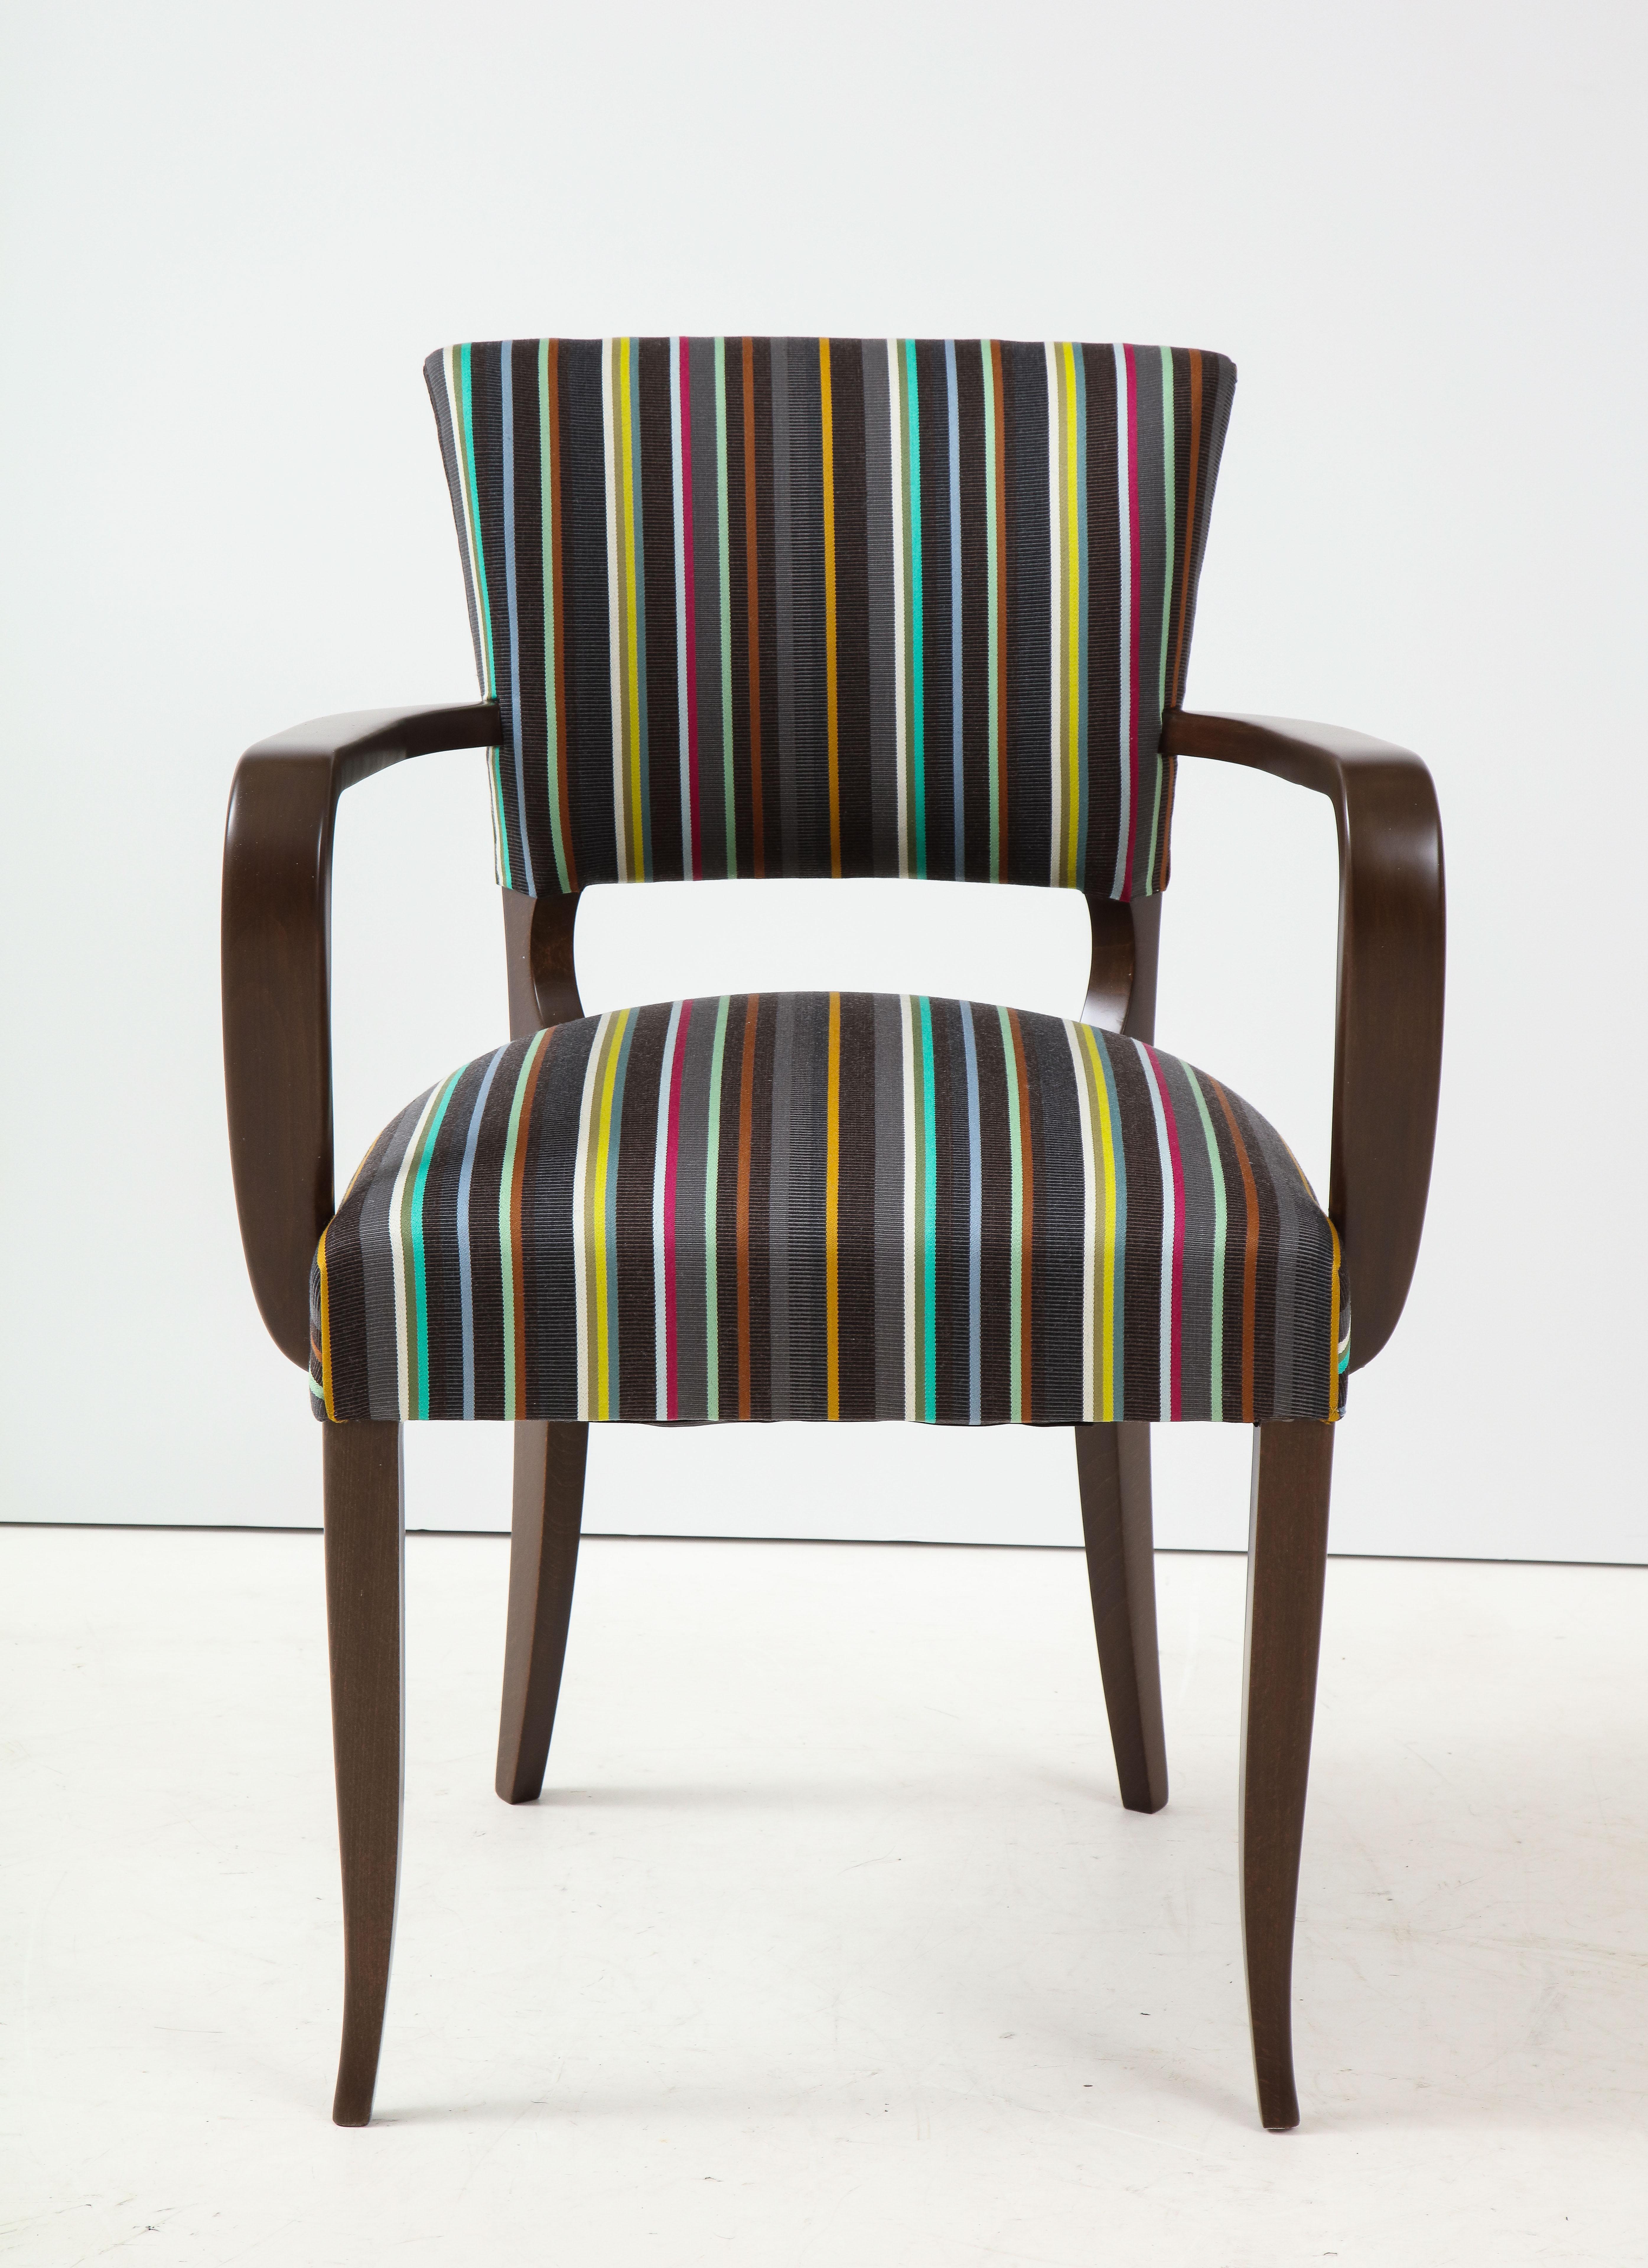 Pair of mint restored, Saville Row inspired French armchairs in a medium toned walnut color and custom upholstered in a Paul Smith striped fabric.